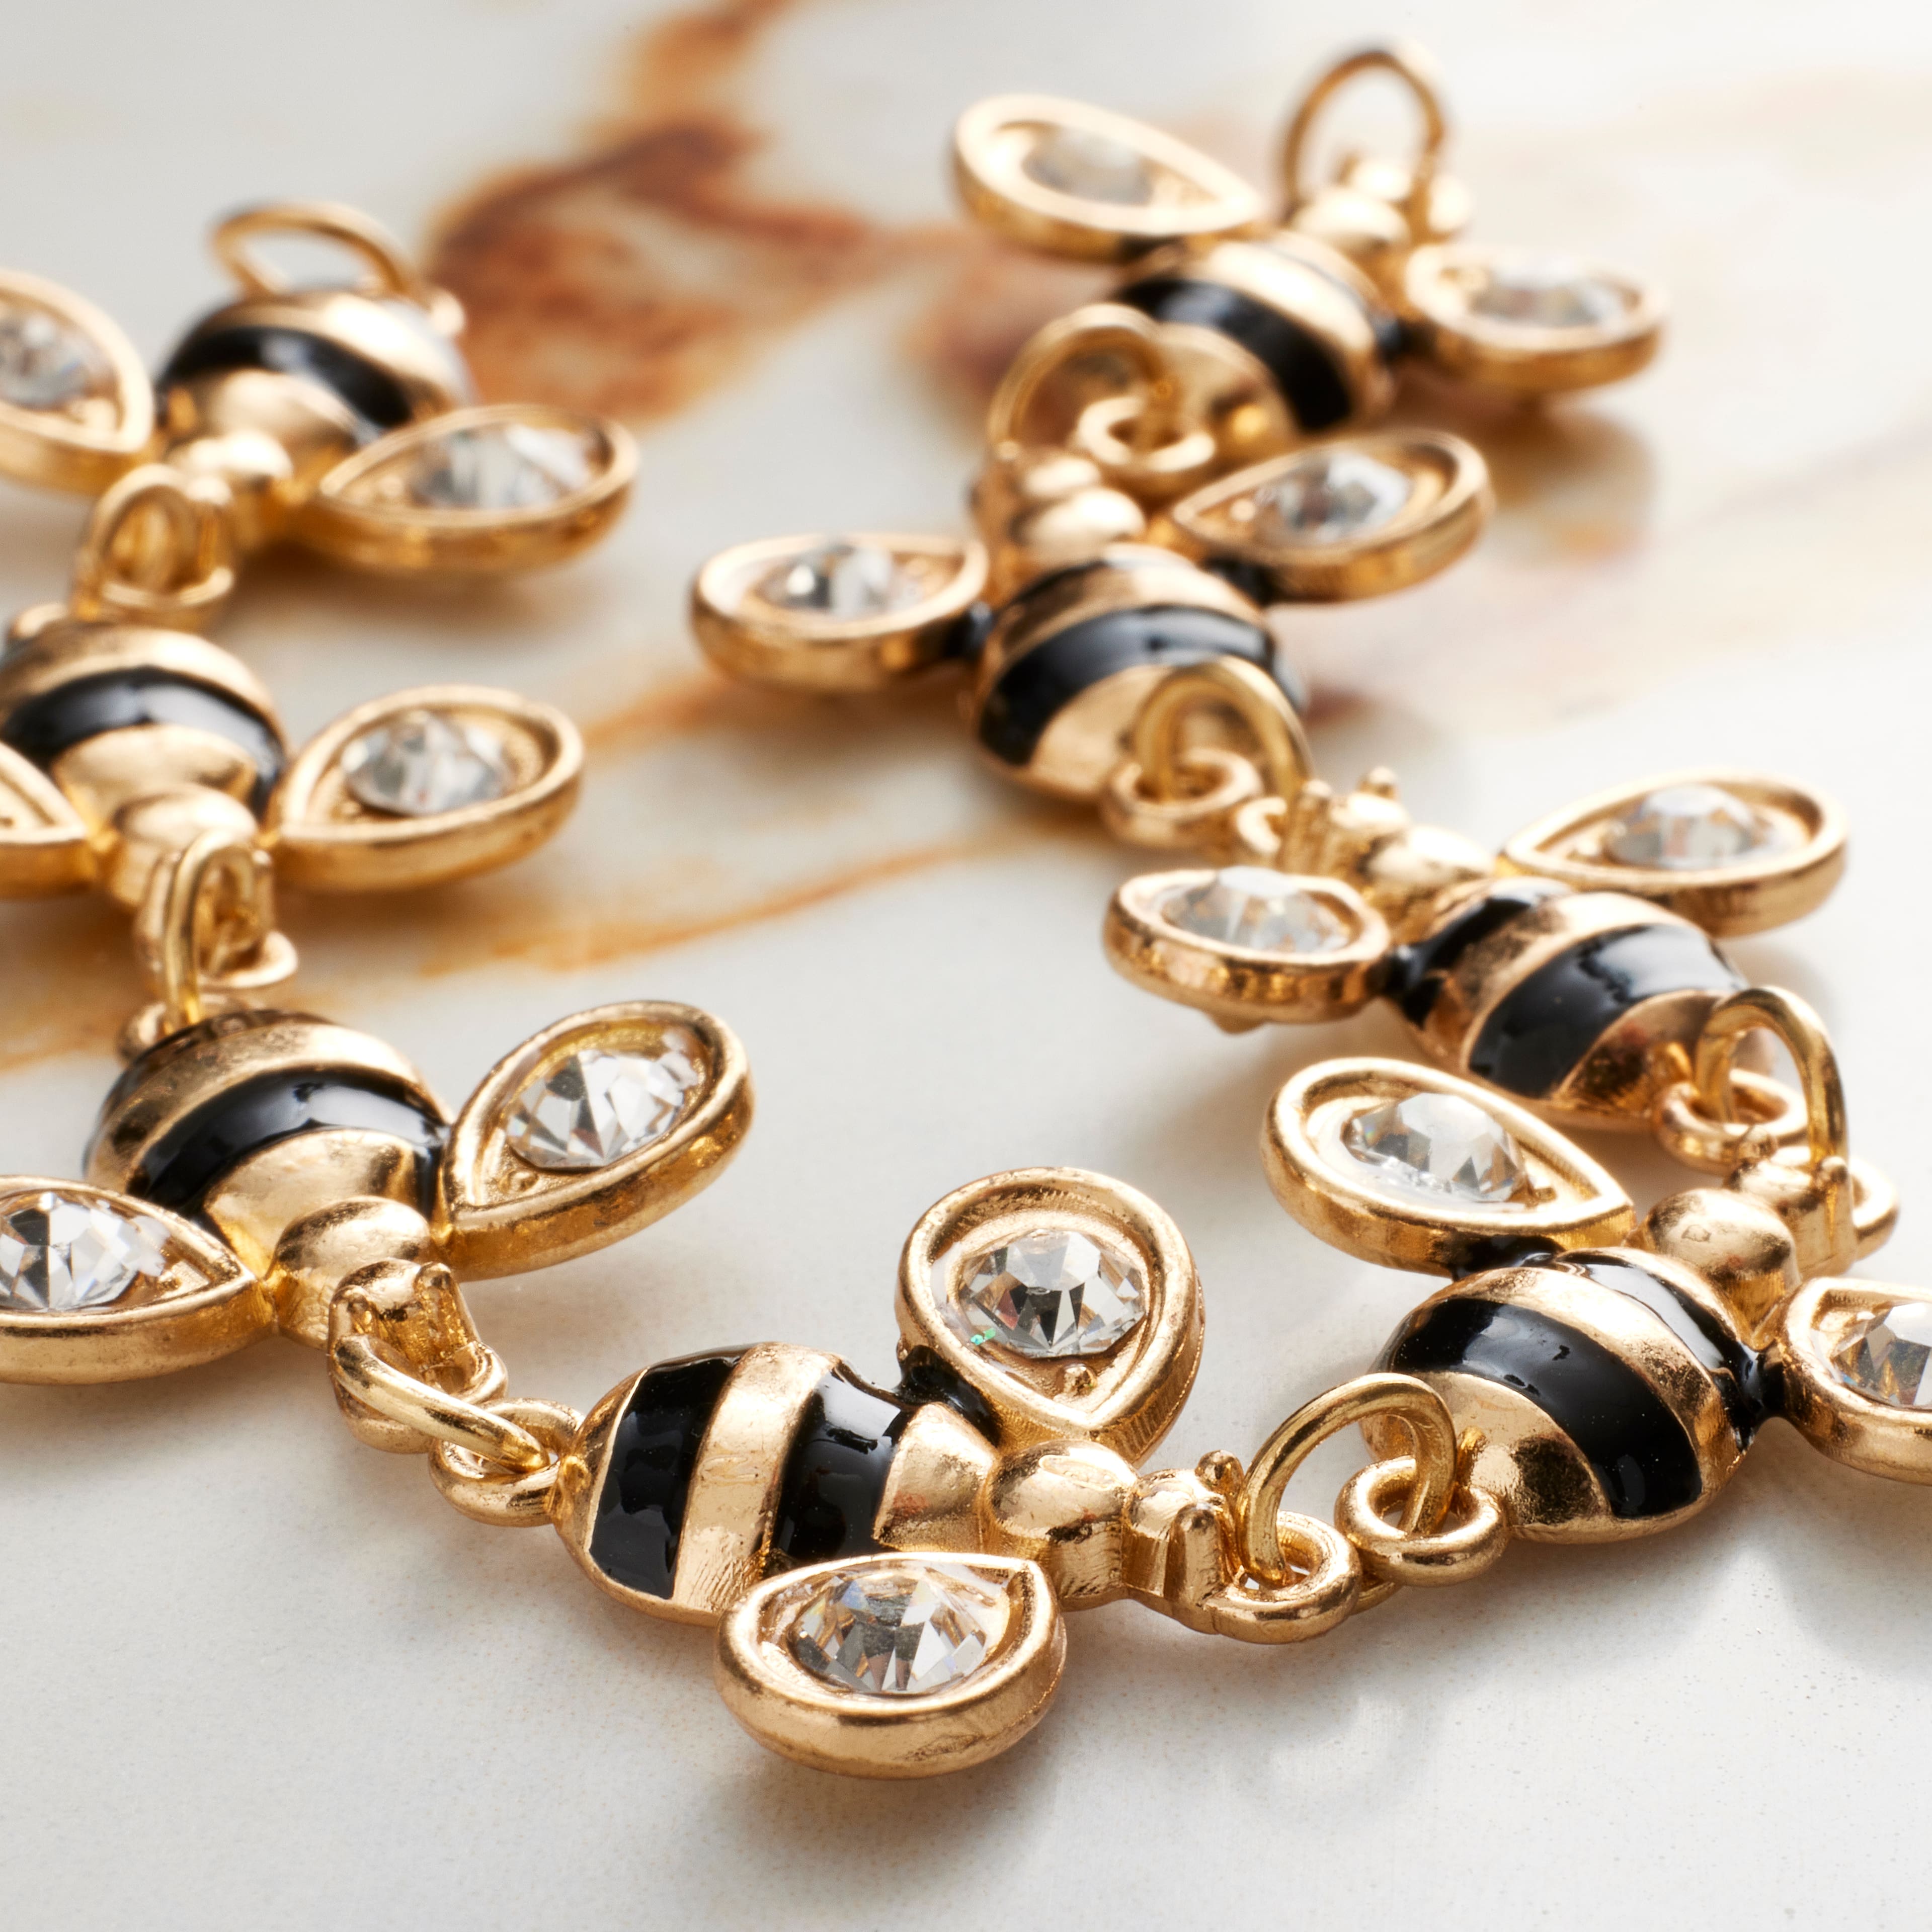 10 Bumble Bee Charms - Gold Tone with enamelling - 15mm, Julz Beads